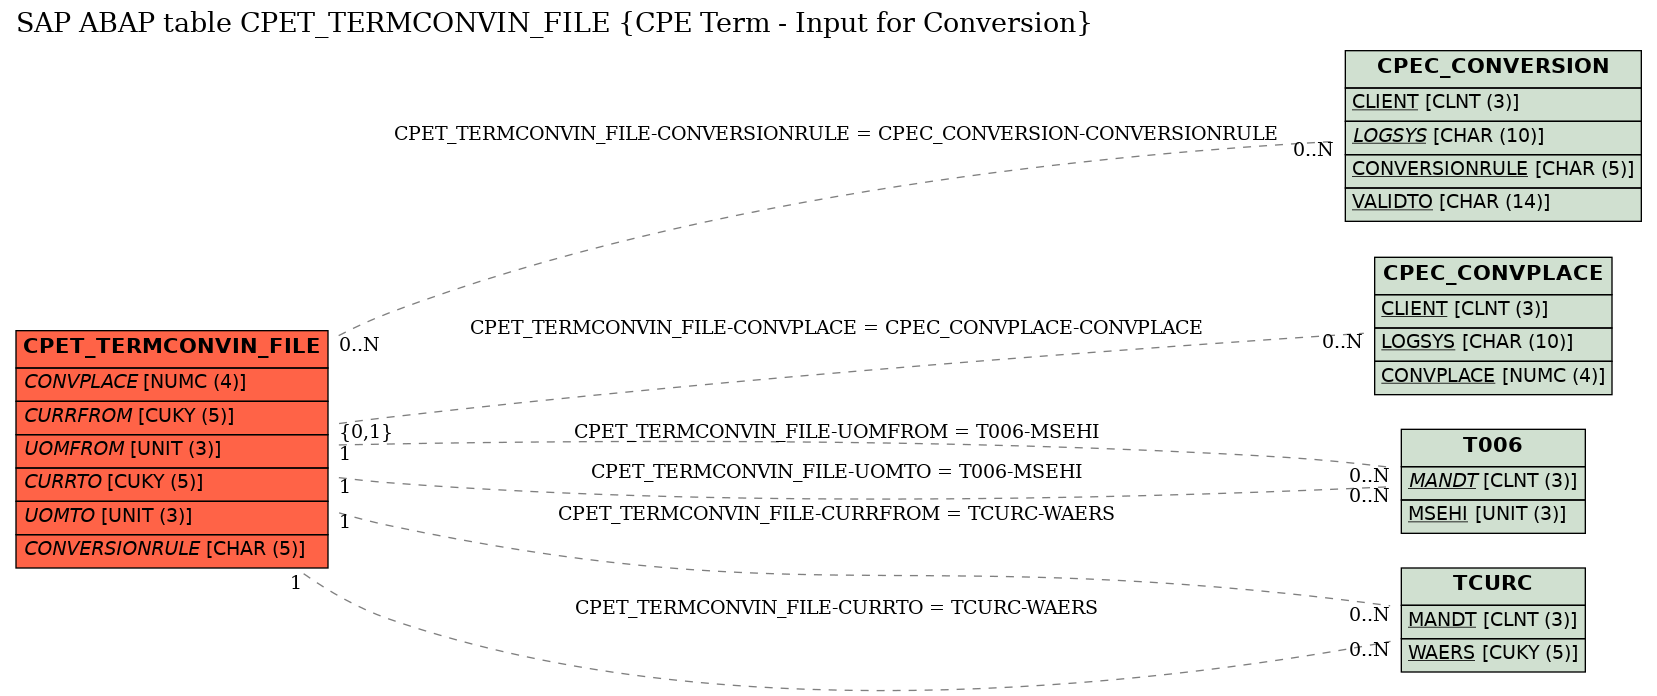 E-R Diagram for table CPET_TERMCONVIN_FILE (CPE Term - Input for Conversion)